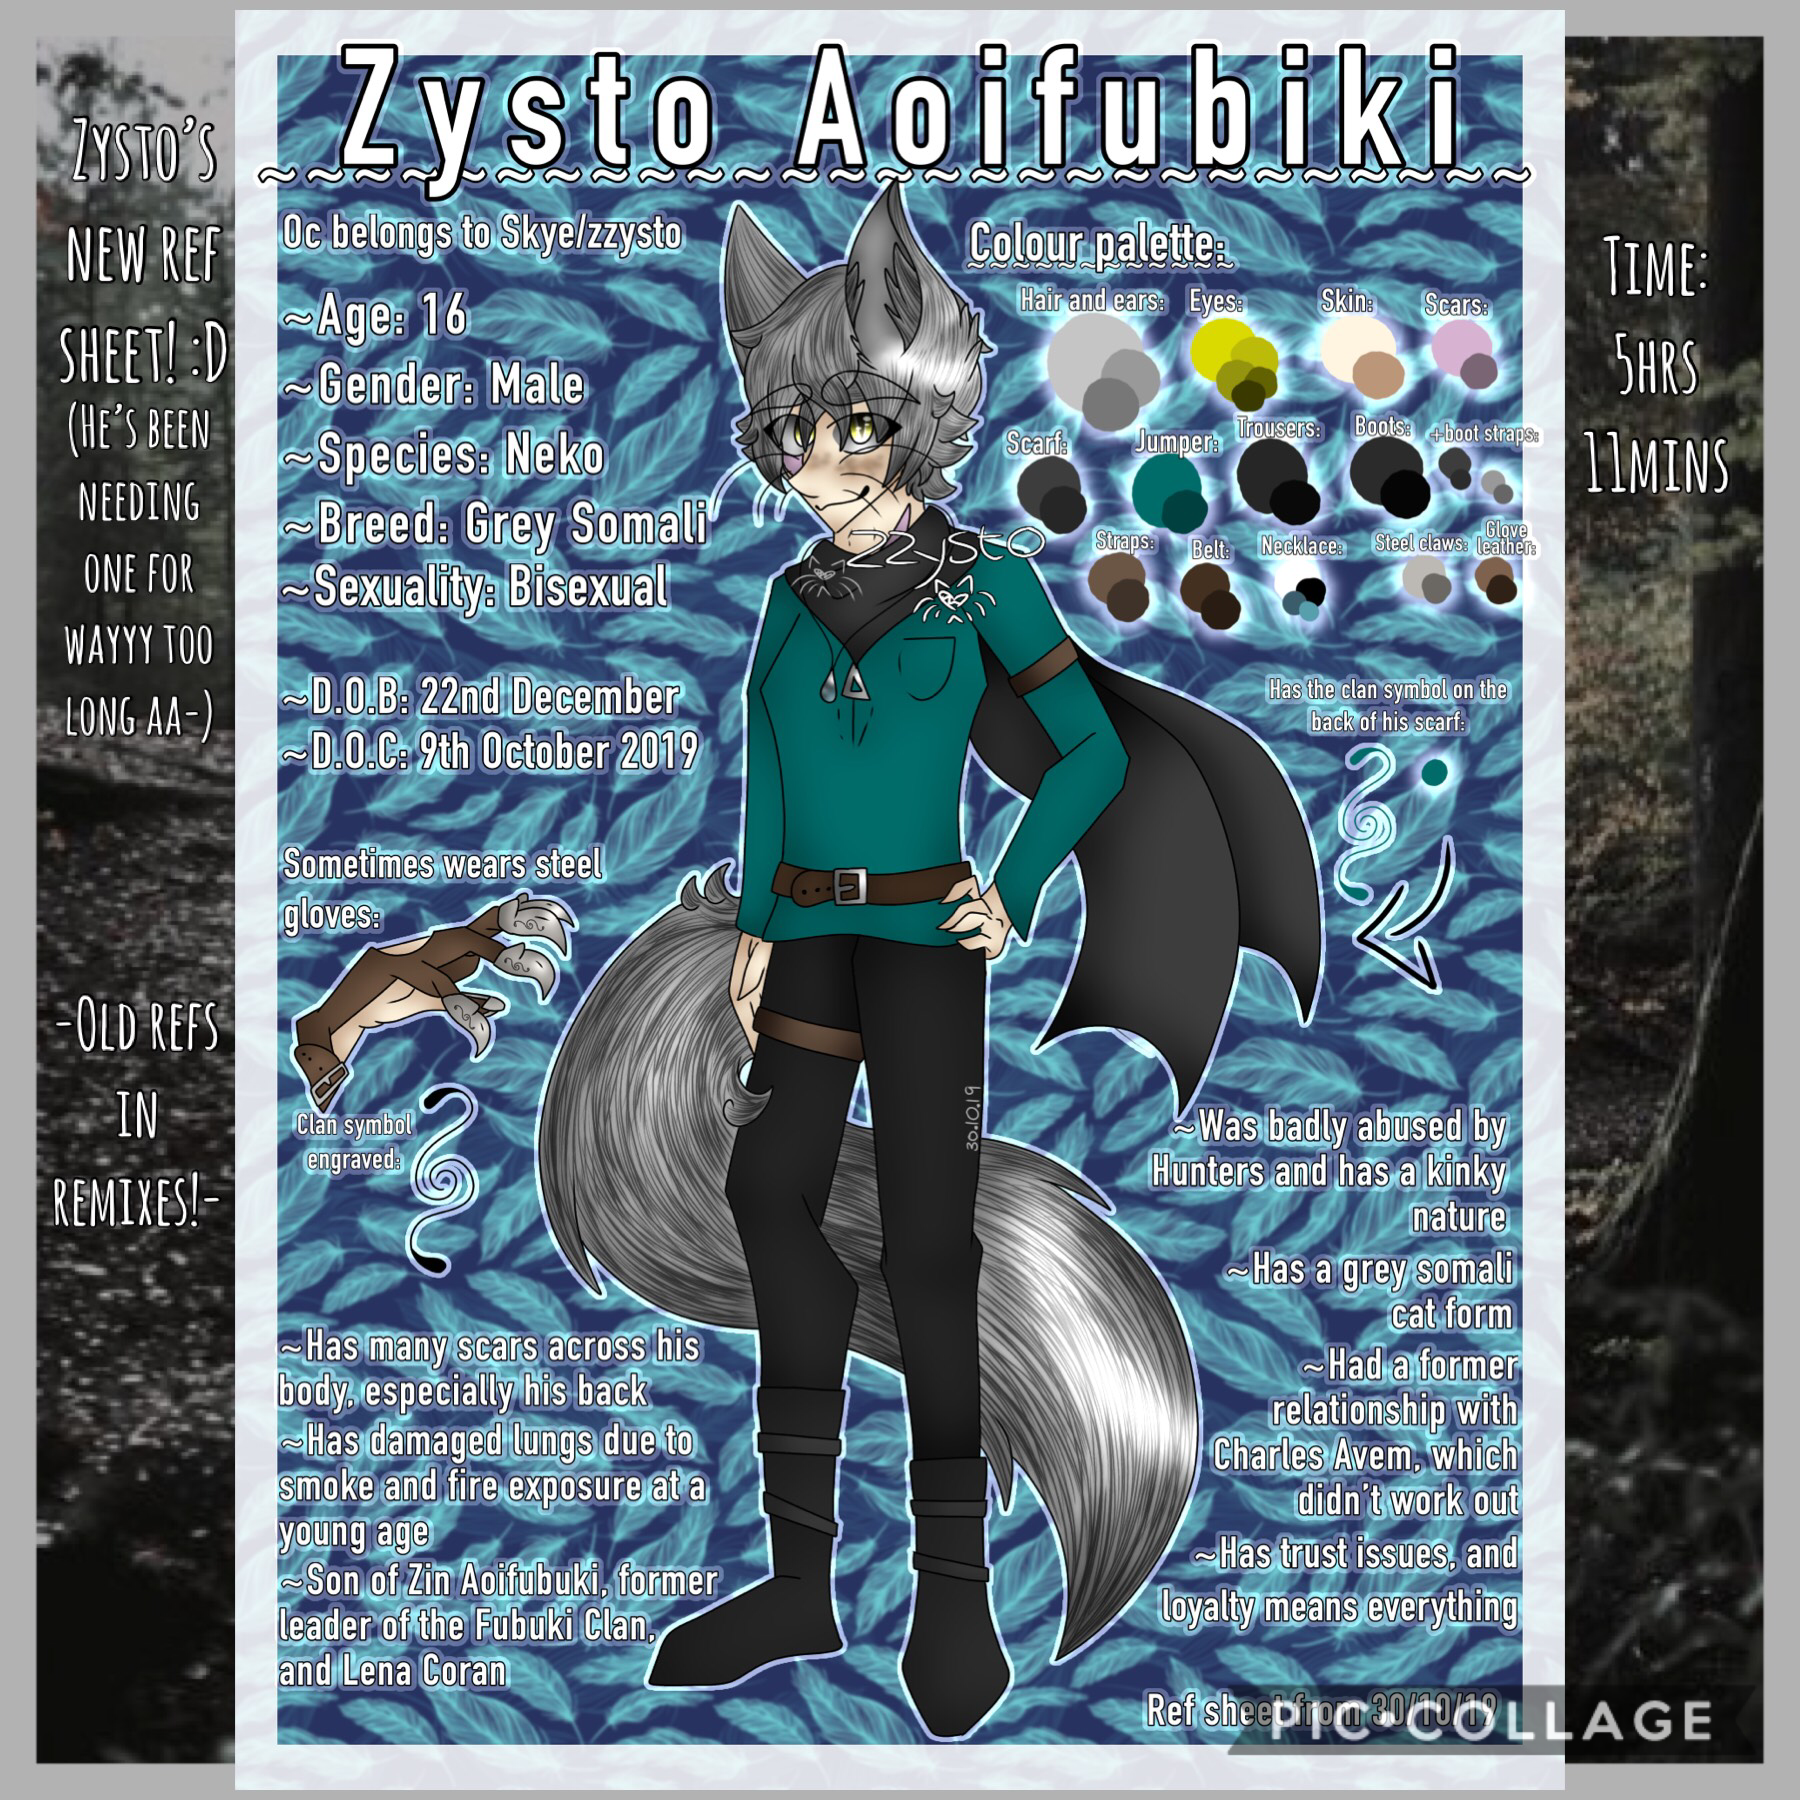 🕯Tap🕯
I DID IT I DID IT F I N A L L Y-
Zysto’s been needing a new ref for waaayyy too long, eEk- I’ll put his old ones in the remixes ;0
All the old refs haven’t really looked like how I imagine my feral kïnkŷ boi, and this one actually does, hehe- plus t